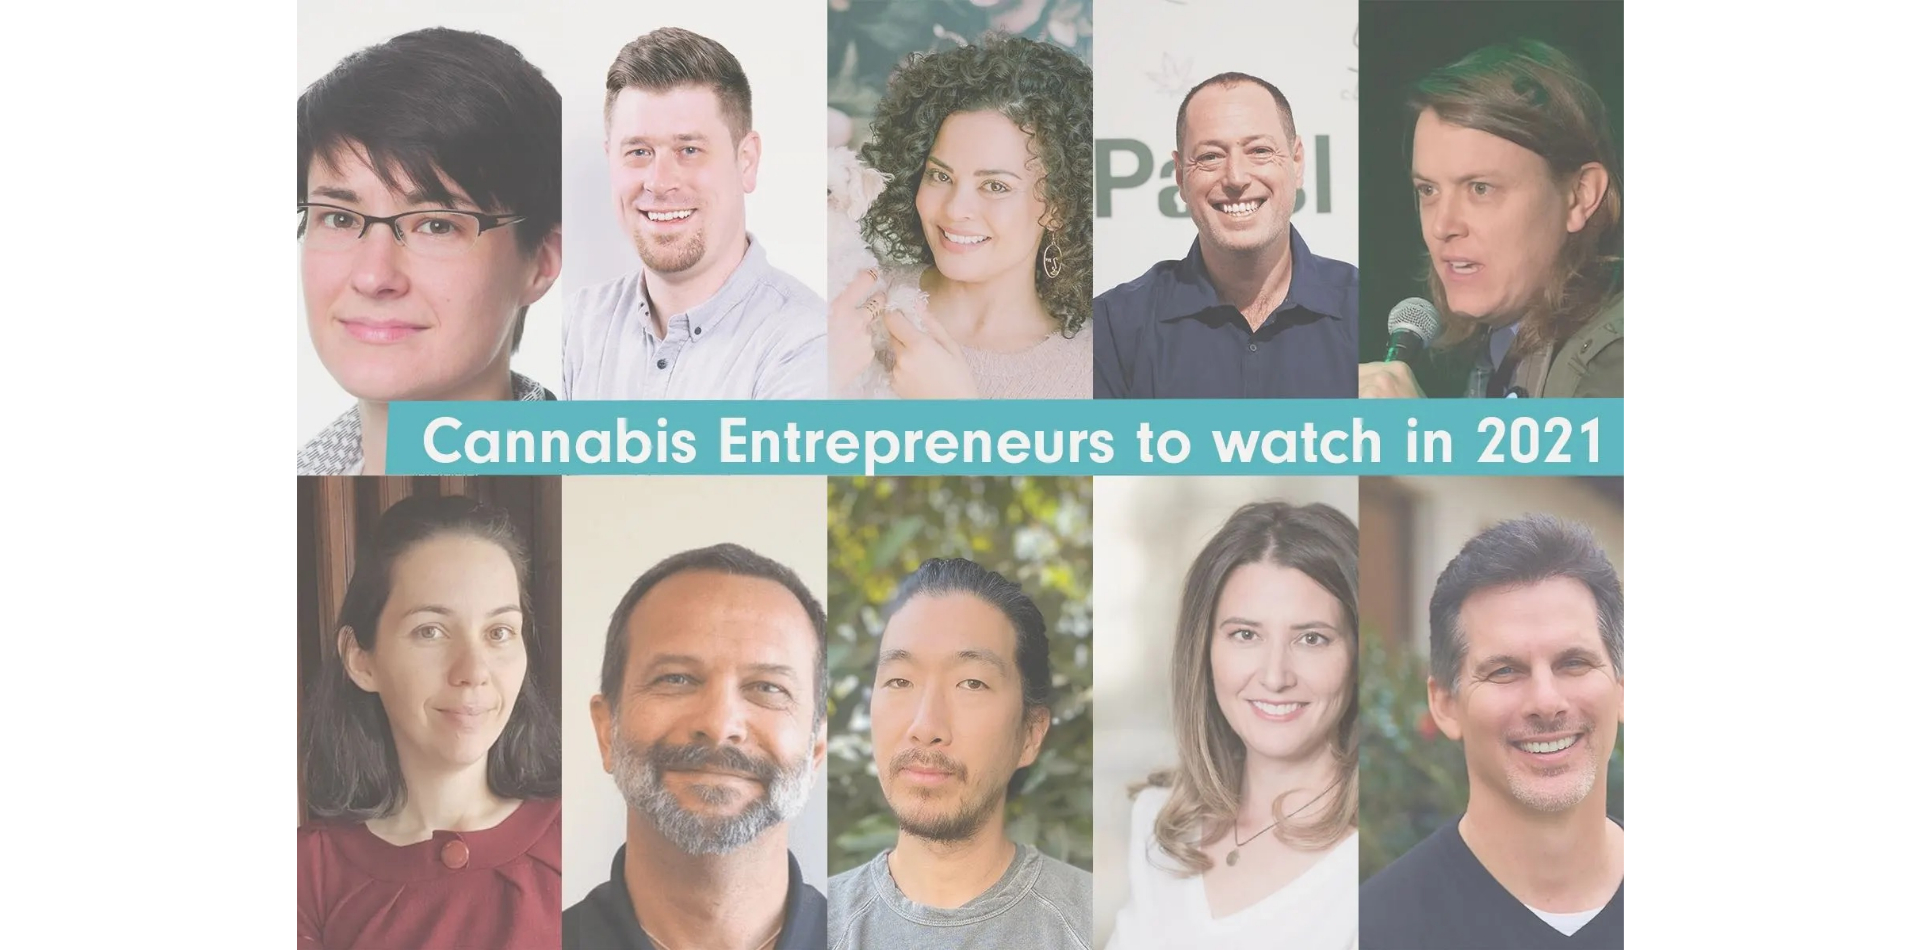 Ingenious Cannabis Entrepreneurs to watch in 2021